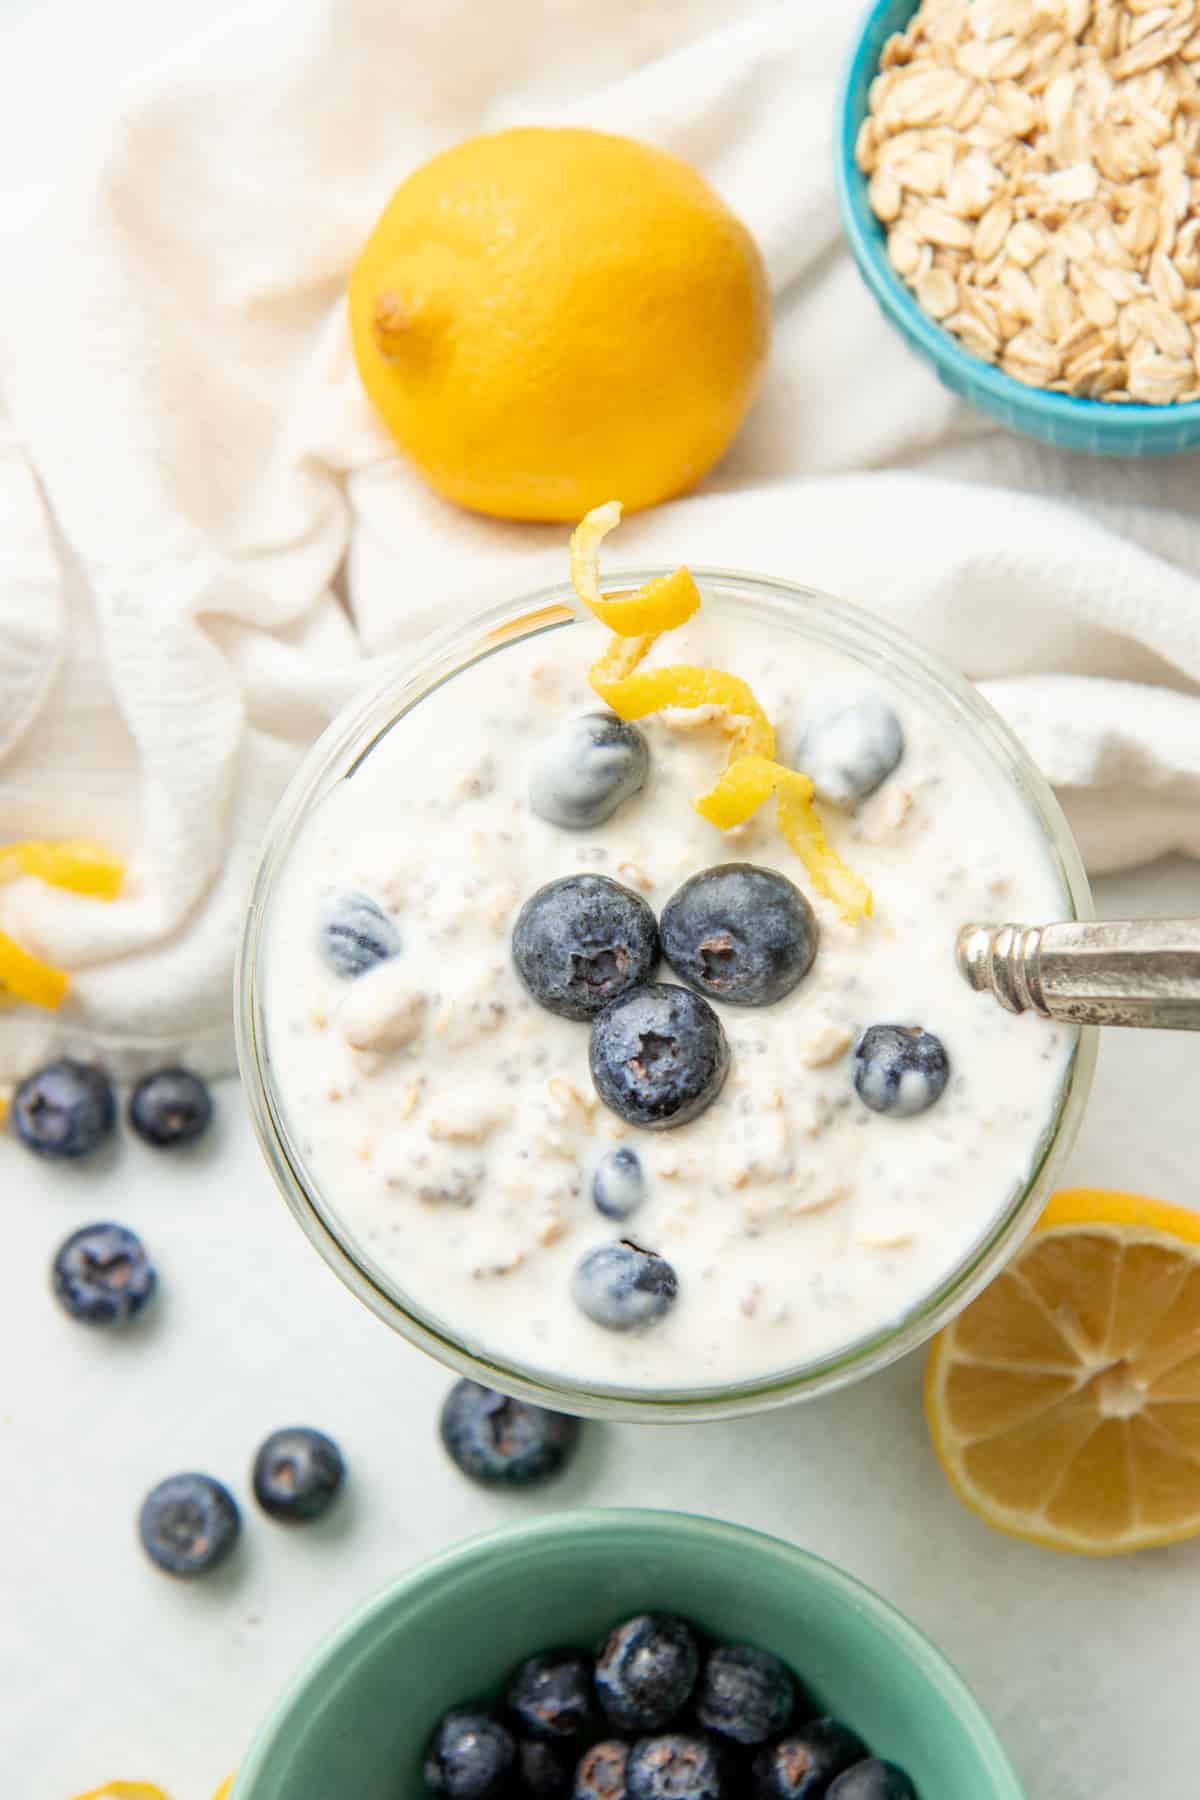 A spoon rests in a glass jar of blueberry overnight oats. Blueberries and a twist of lemon rest on top of the oatmeal.